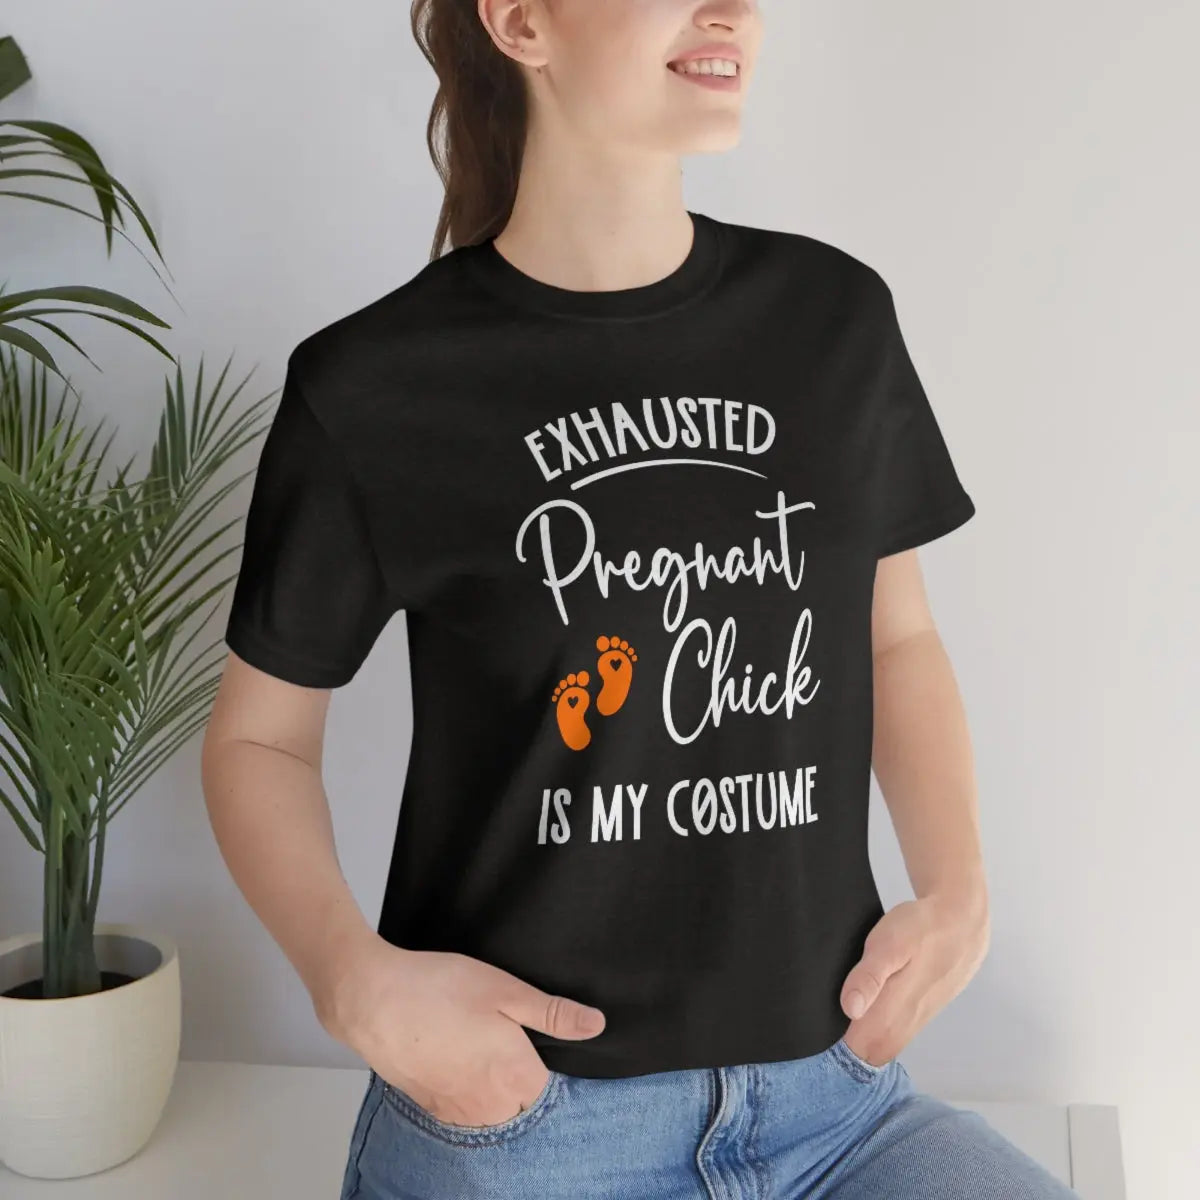 Exhausted Pregnant Chick Costume Tee, Halloween Pregnancy Shirt, Pregnancy Announcement Tee, Cute Maternity Halloween Tee Printify